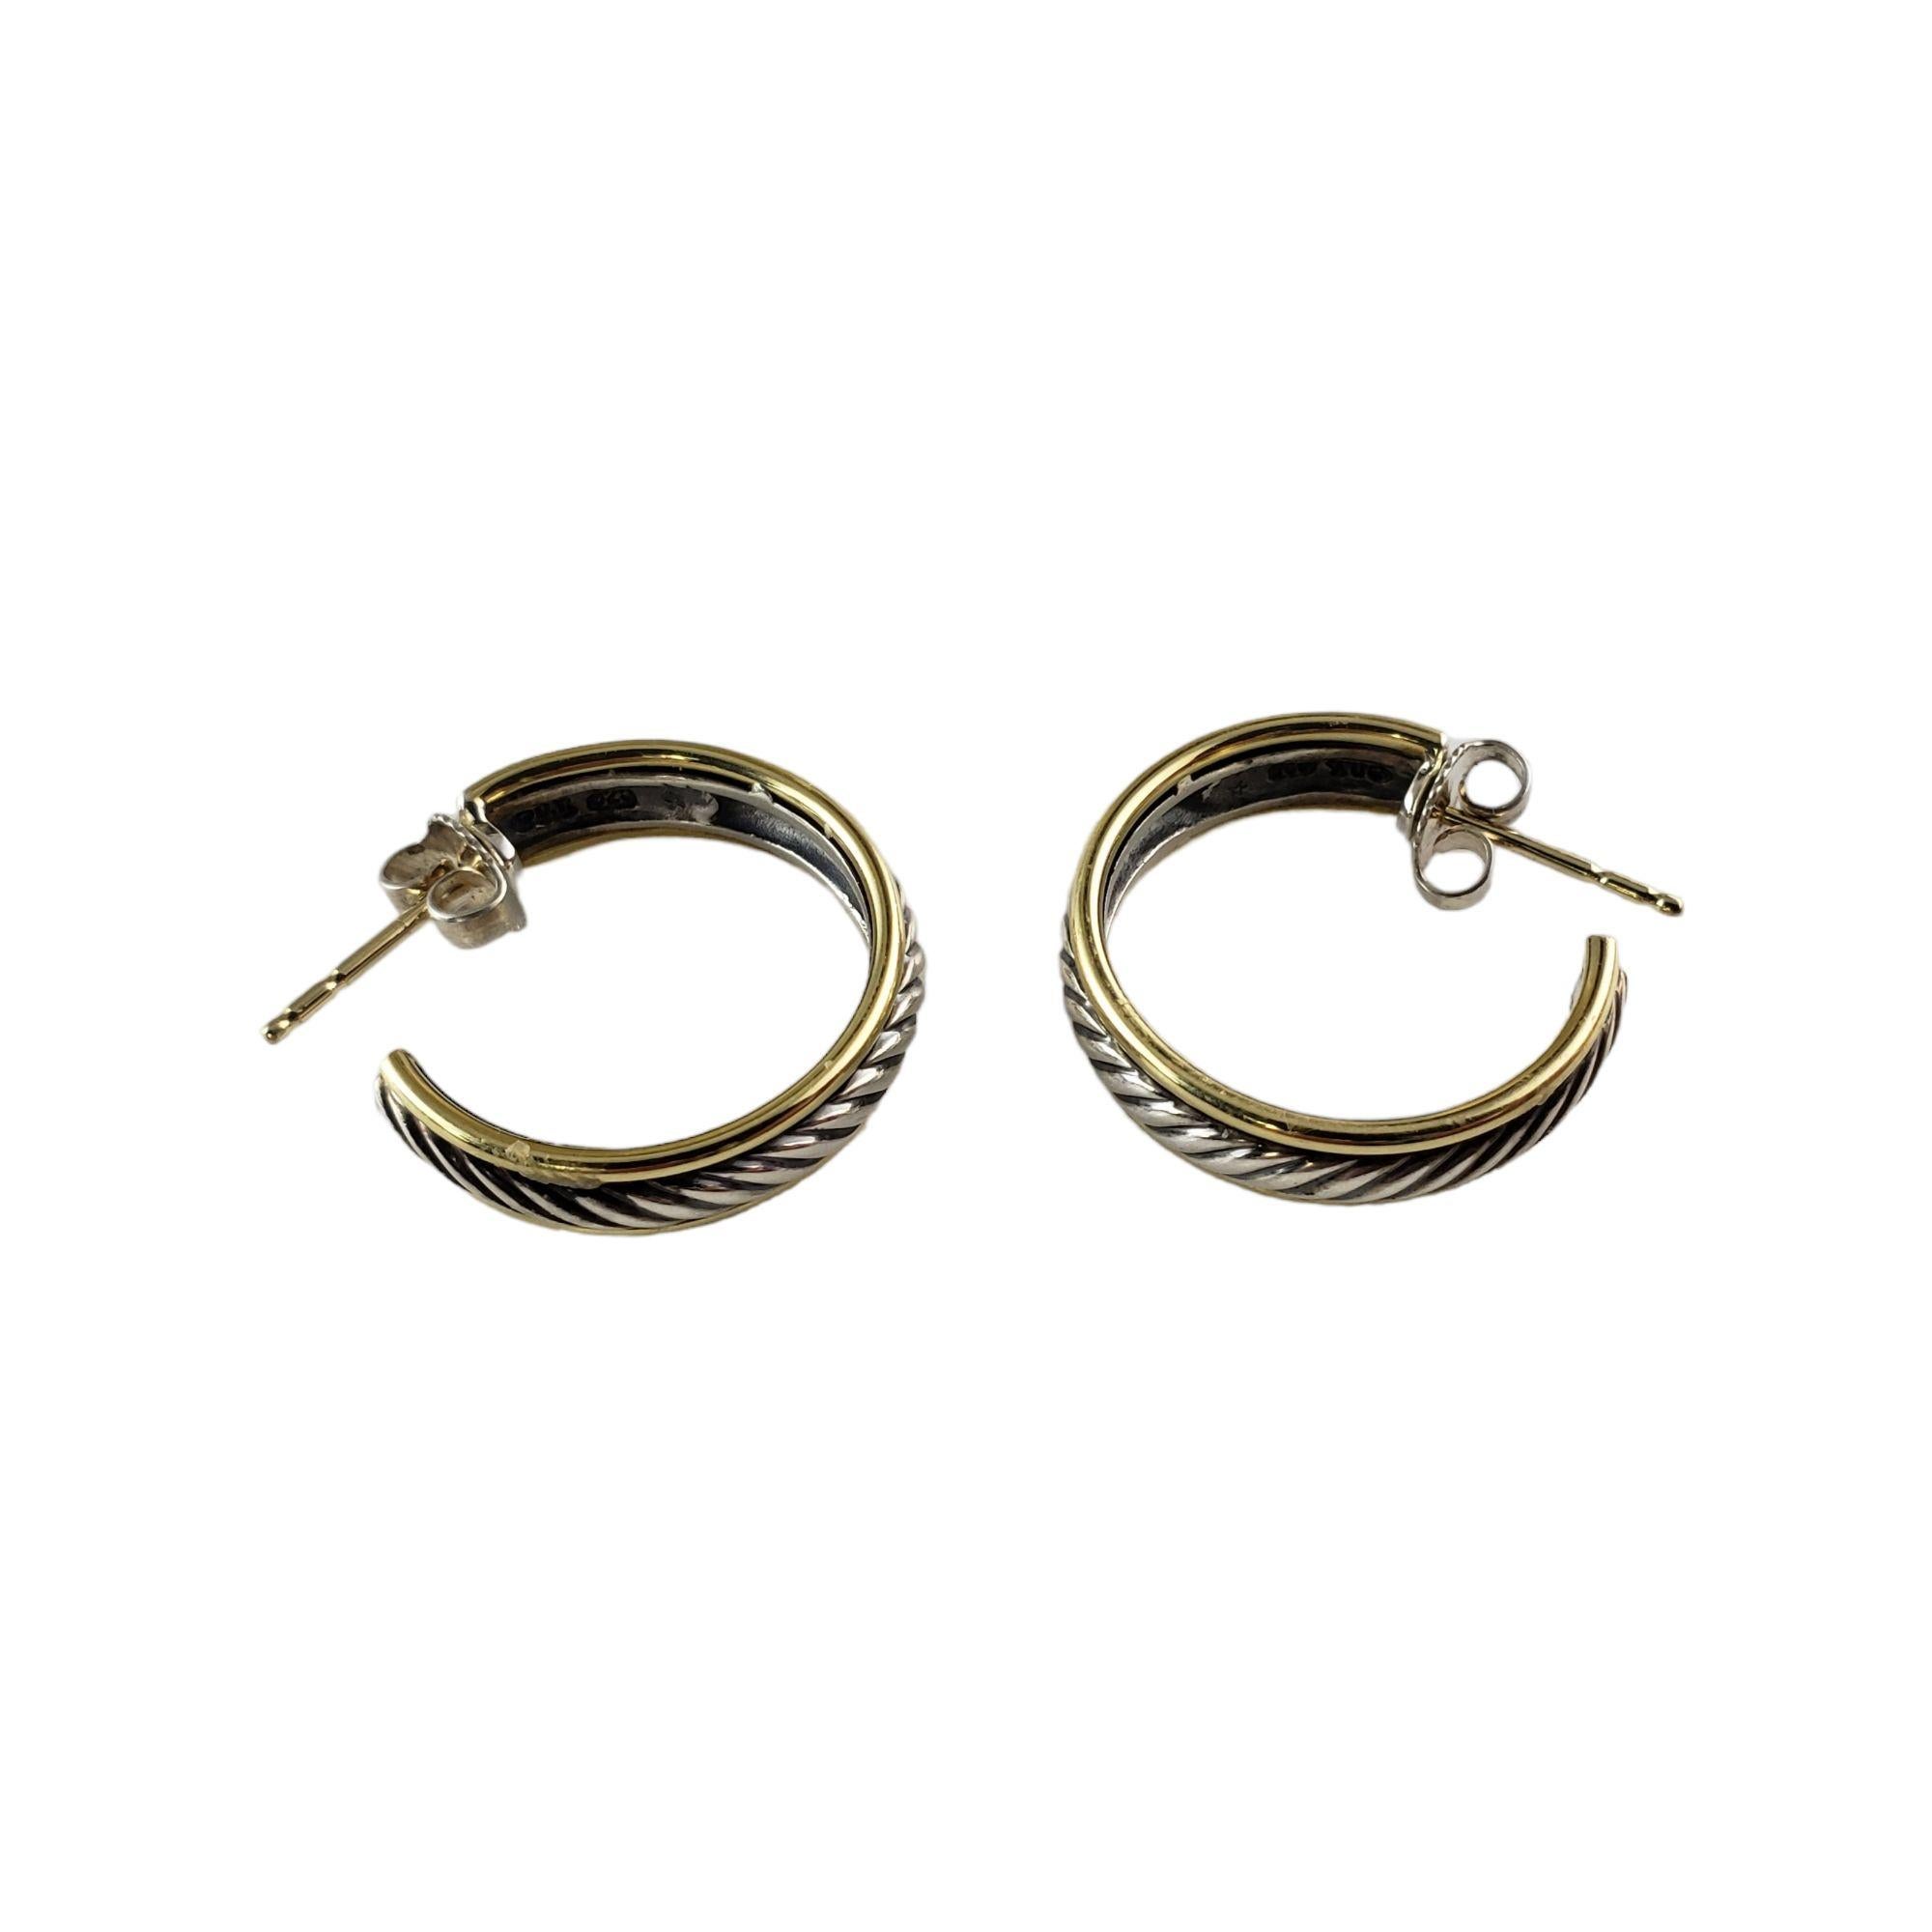 Vintage David Yurman Sterling Silver and 18 Karat Yellow Gold Cable Hoop Earrings-

These lovely David Yurman hoop earrings are crafted in beautifully detailed sterling silver and 18K yellow gold. Width: 5 mm.

Size: 22 mm

Weight: 7.3 gr./ 4.6